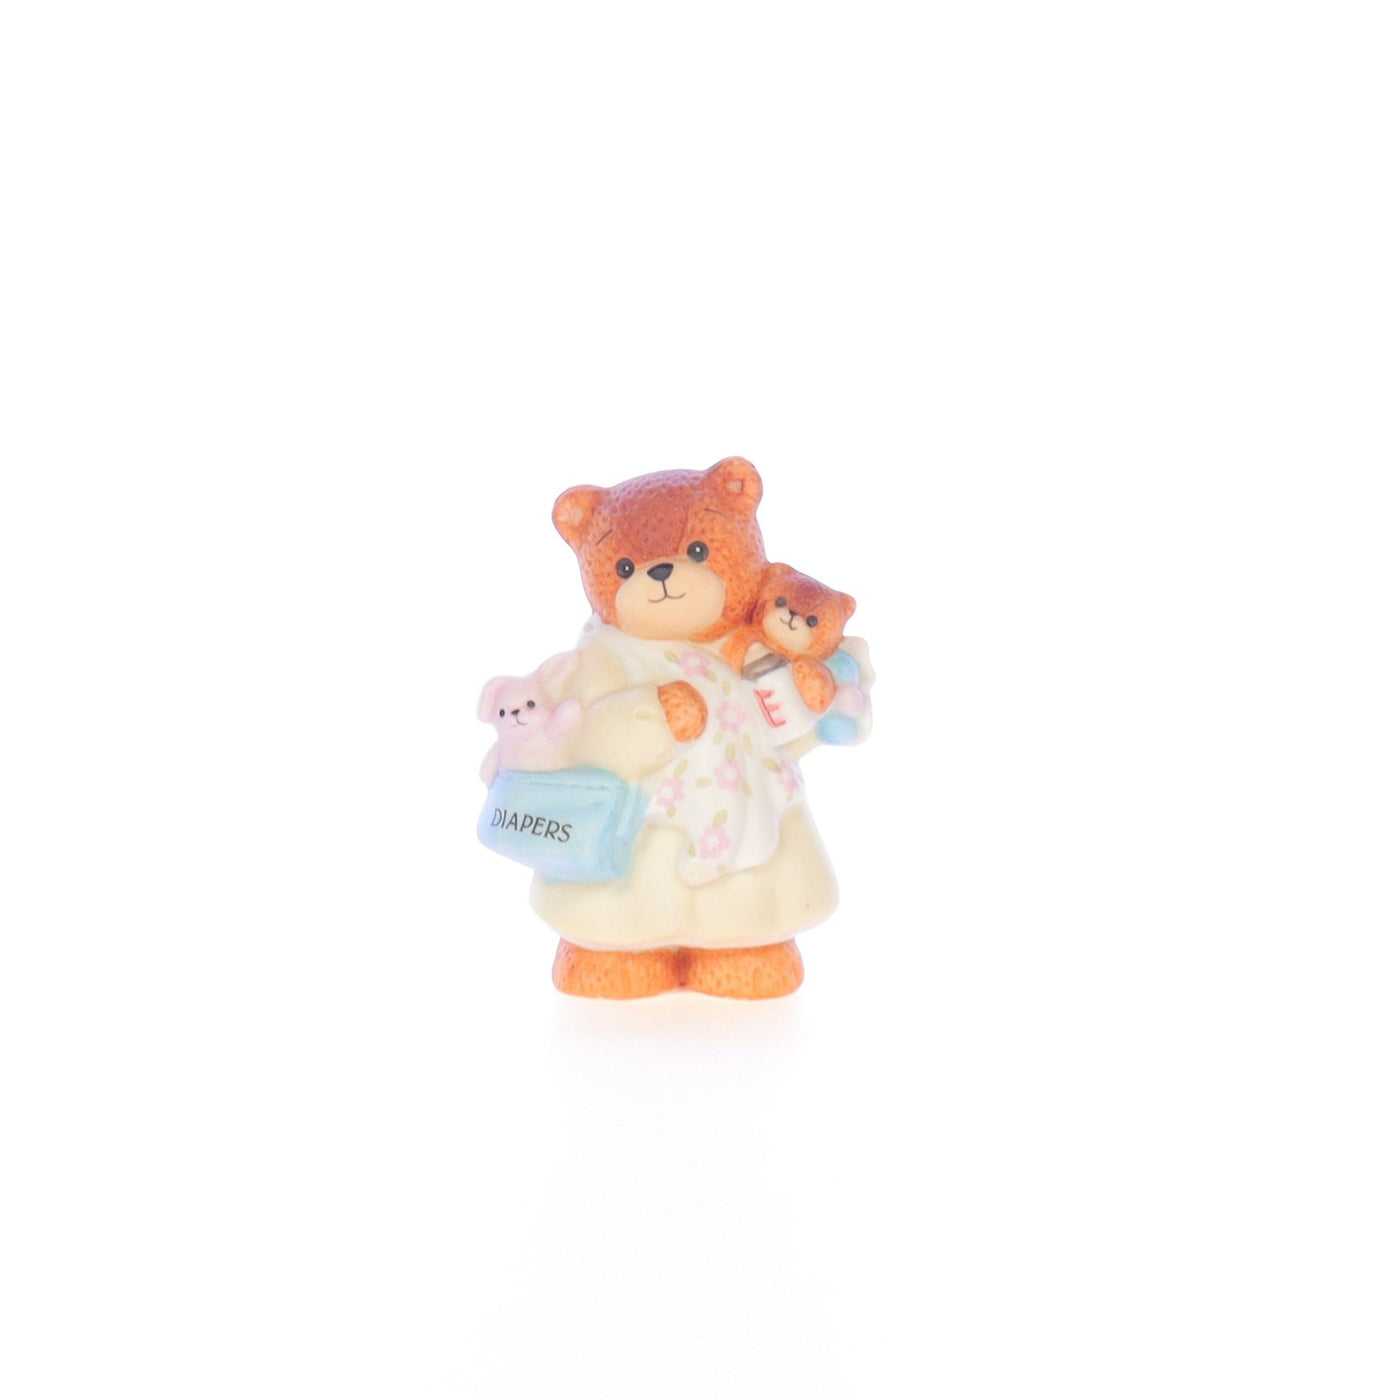 Lucy_And_Me_by_Lucy_Atwell_Porcelain_Figurine_Mama_Bear_with_Diaper_Bag_and_Baby_Lucy_Unknown_078_01